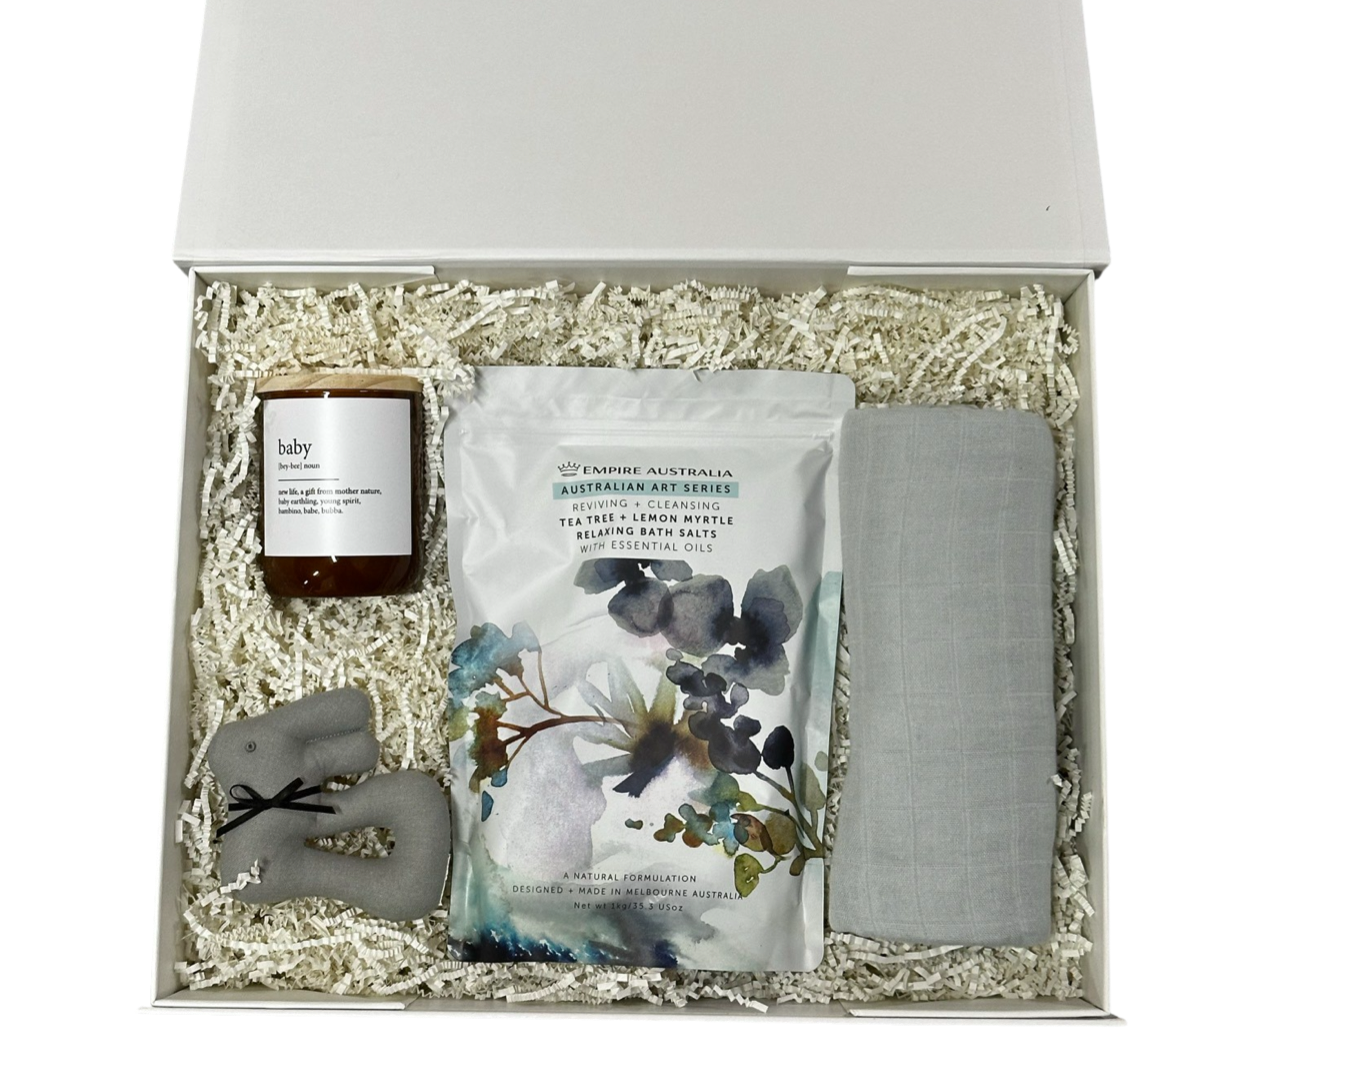 New Life - Gifted Design - Gift Boxes - Perth